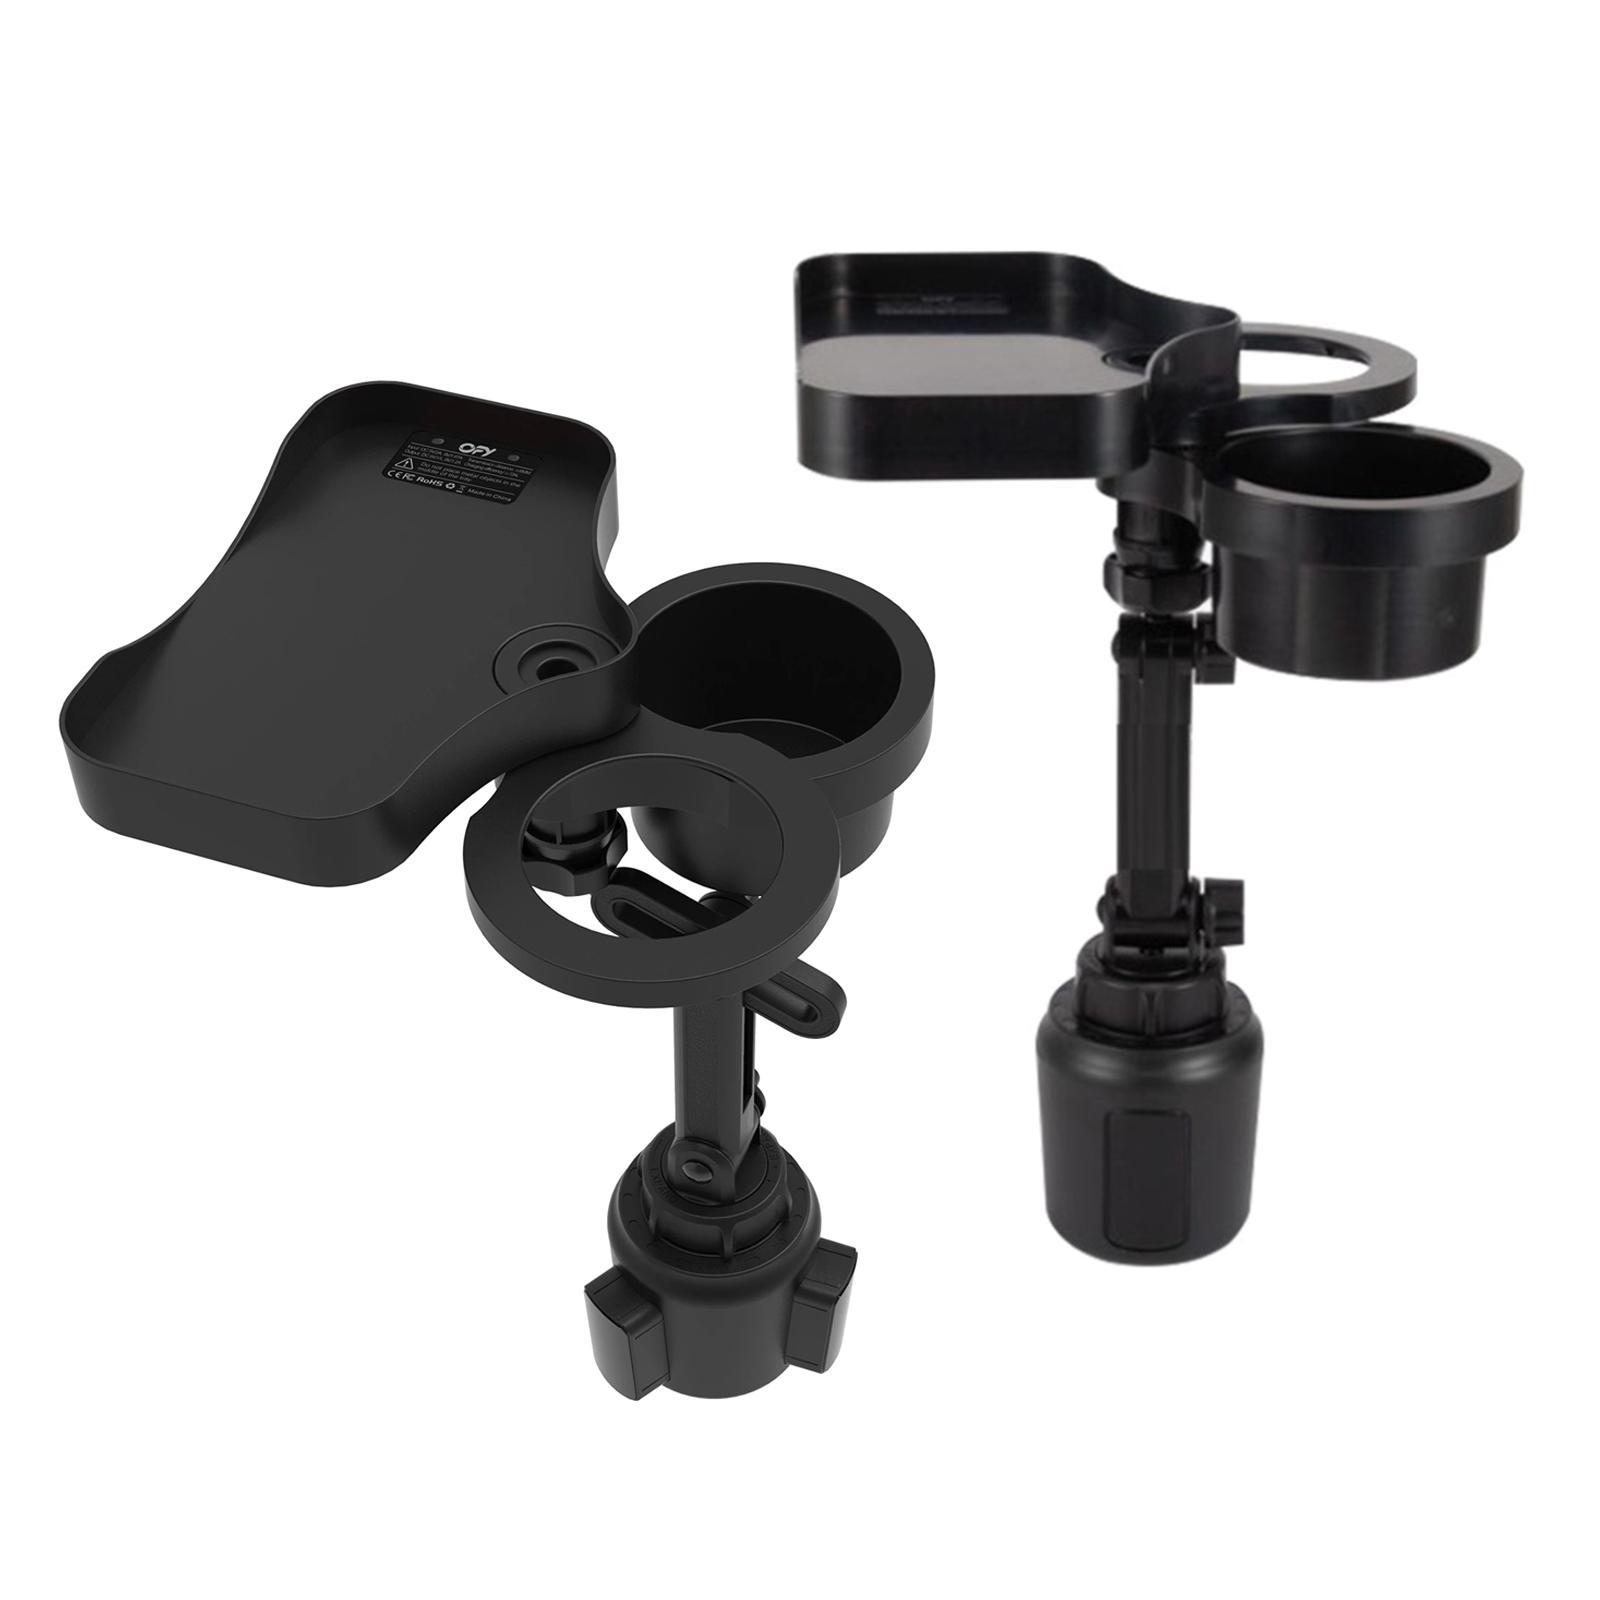 Cup Holder Expander Adapter Stand Rack Rotating base Phone